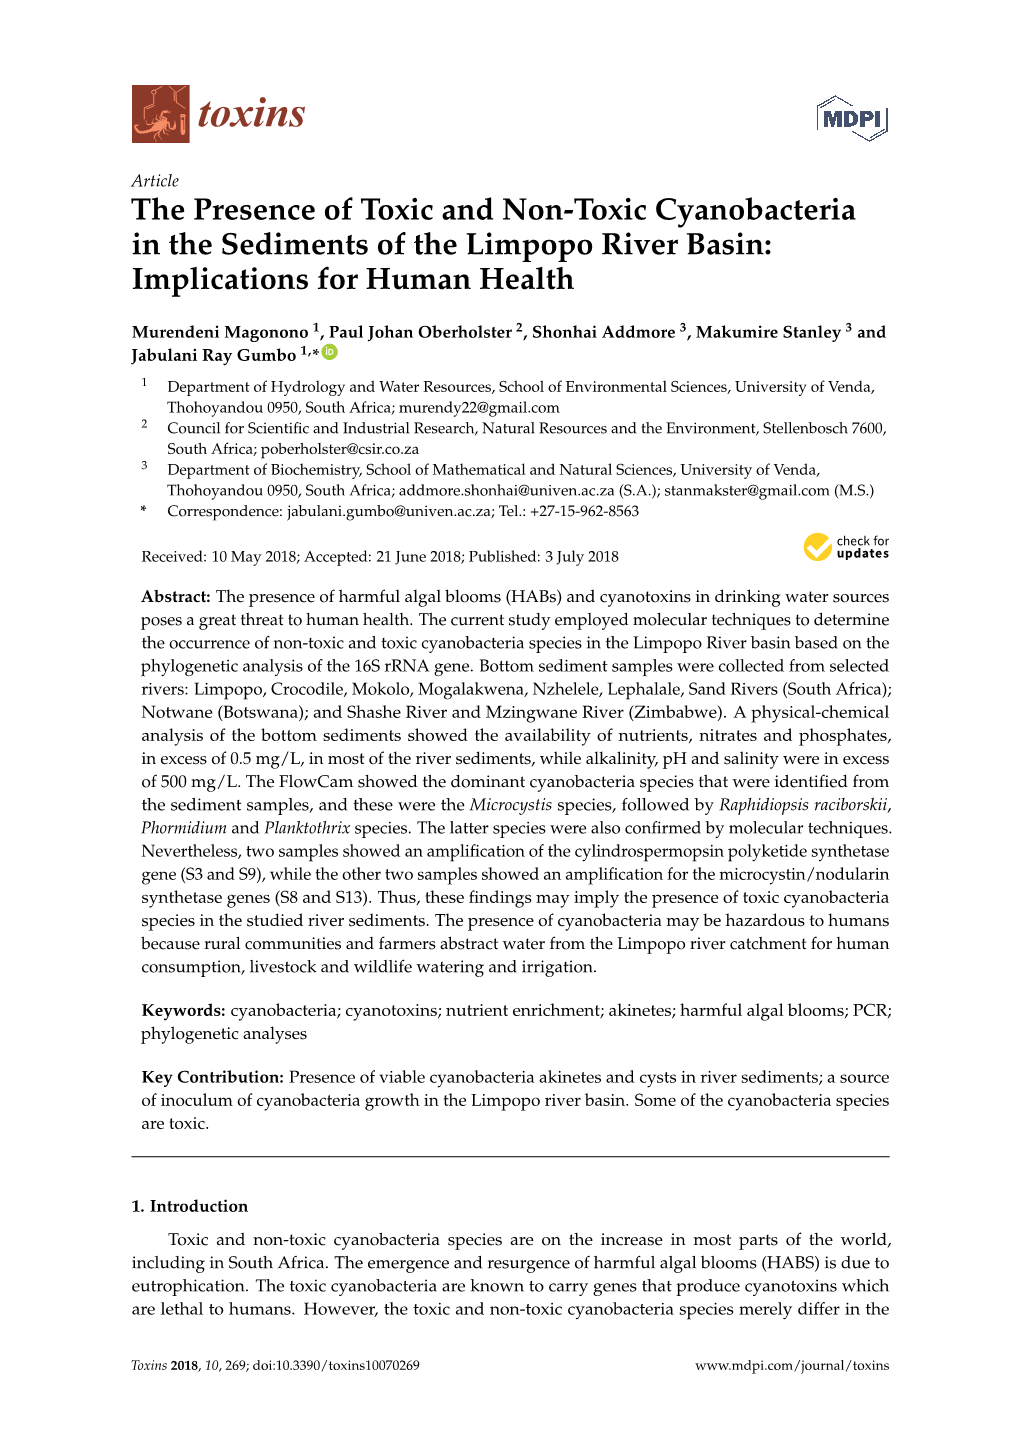 The Presence of Toxic and Non-Toxic Cyanobacteria in the Sediments of the Limpopo River Basin: Implications for Human Health